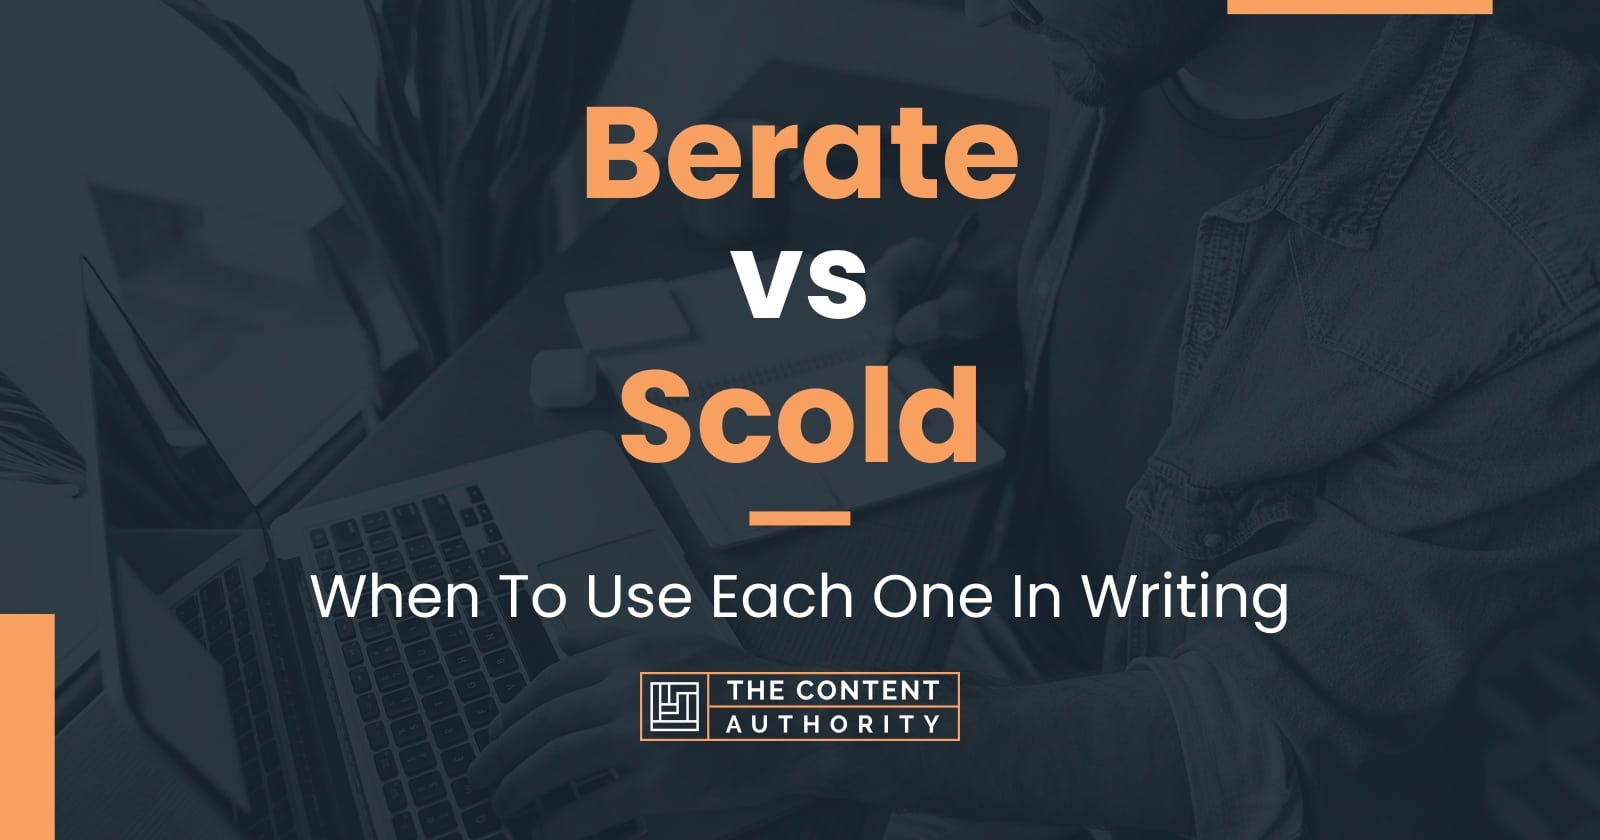 Berate vs Scold: When To Use Each One In Writing